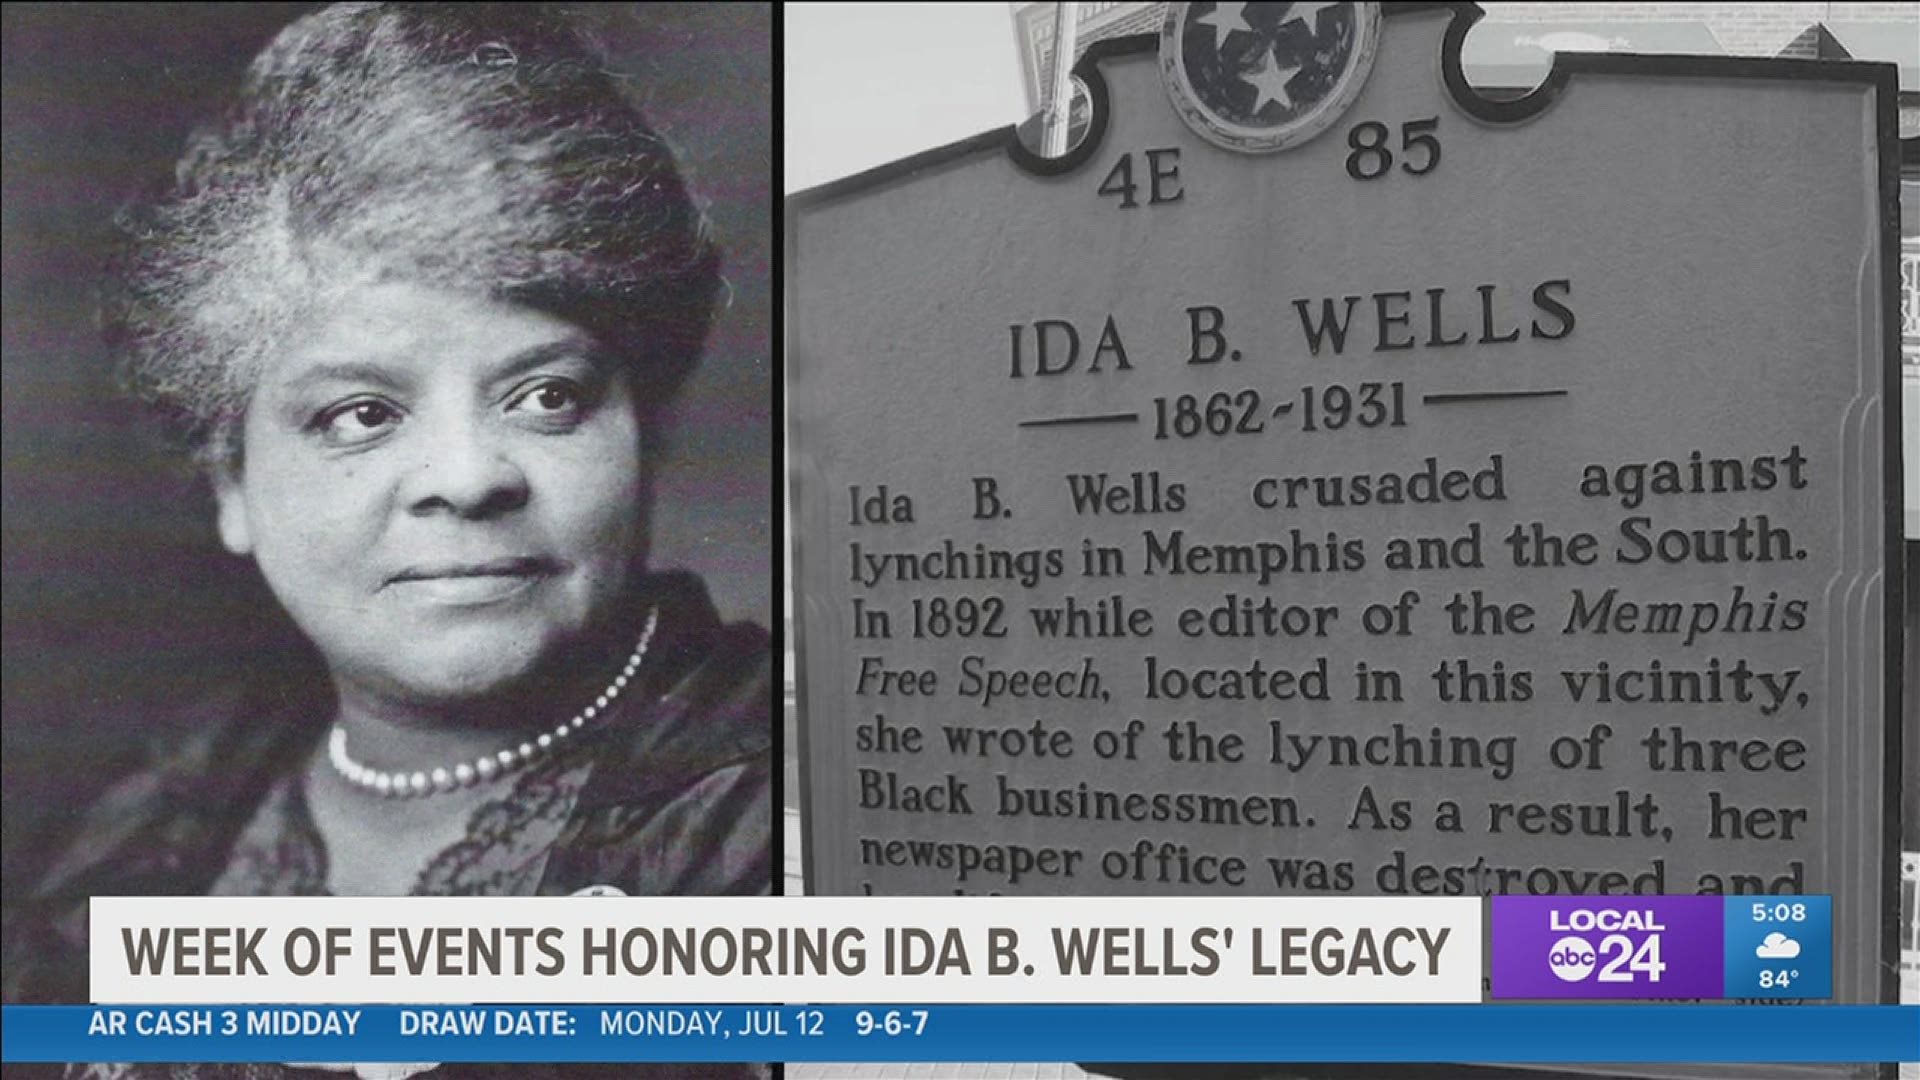 Ida B. Wells' Celebration Week is officially underway. Wells was a trailblazing journalist and early civil rights activist.